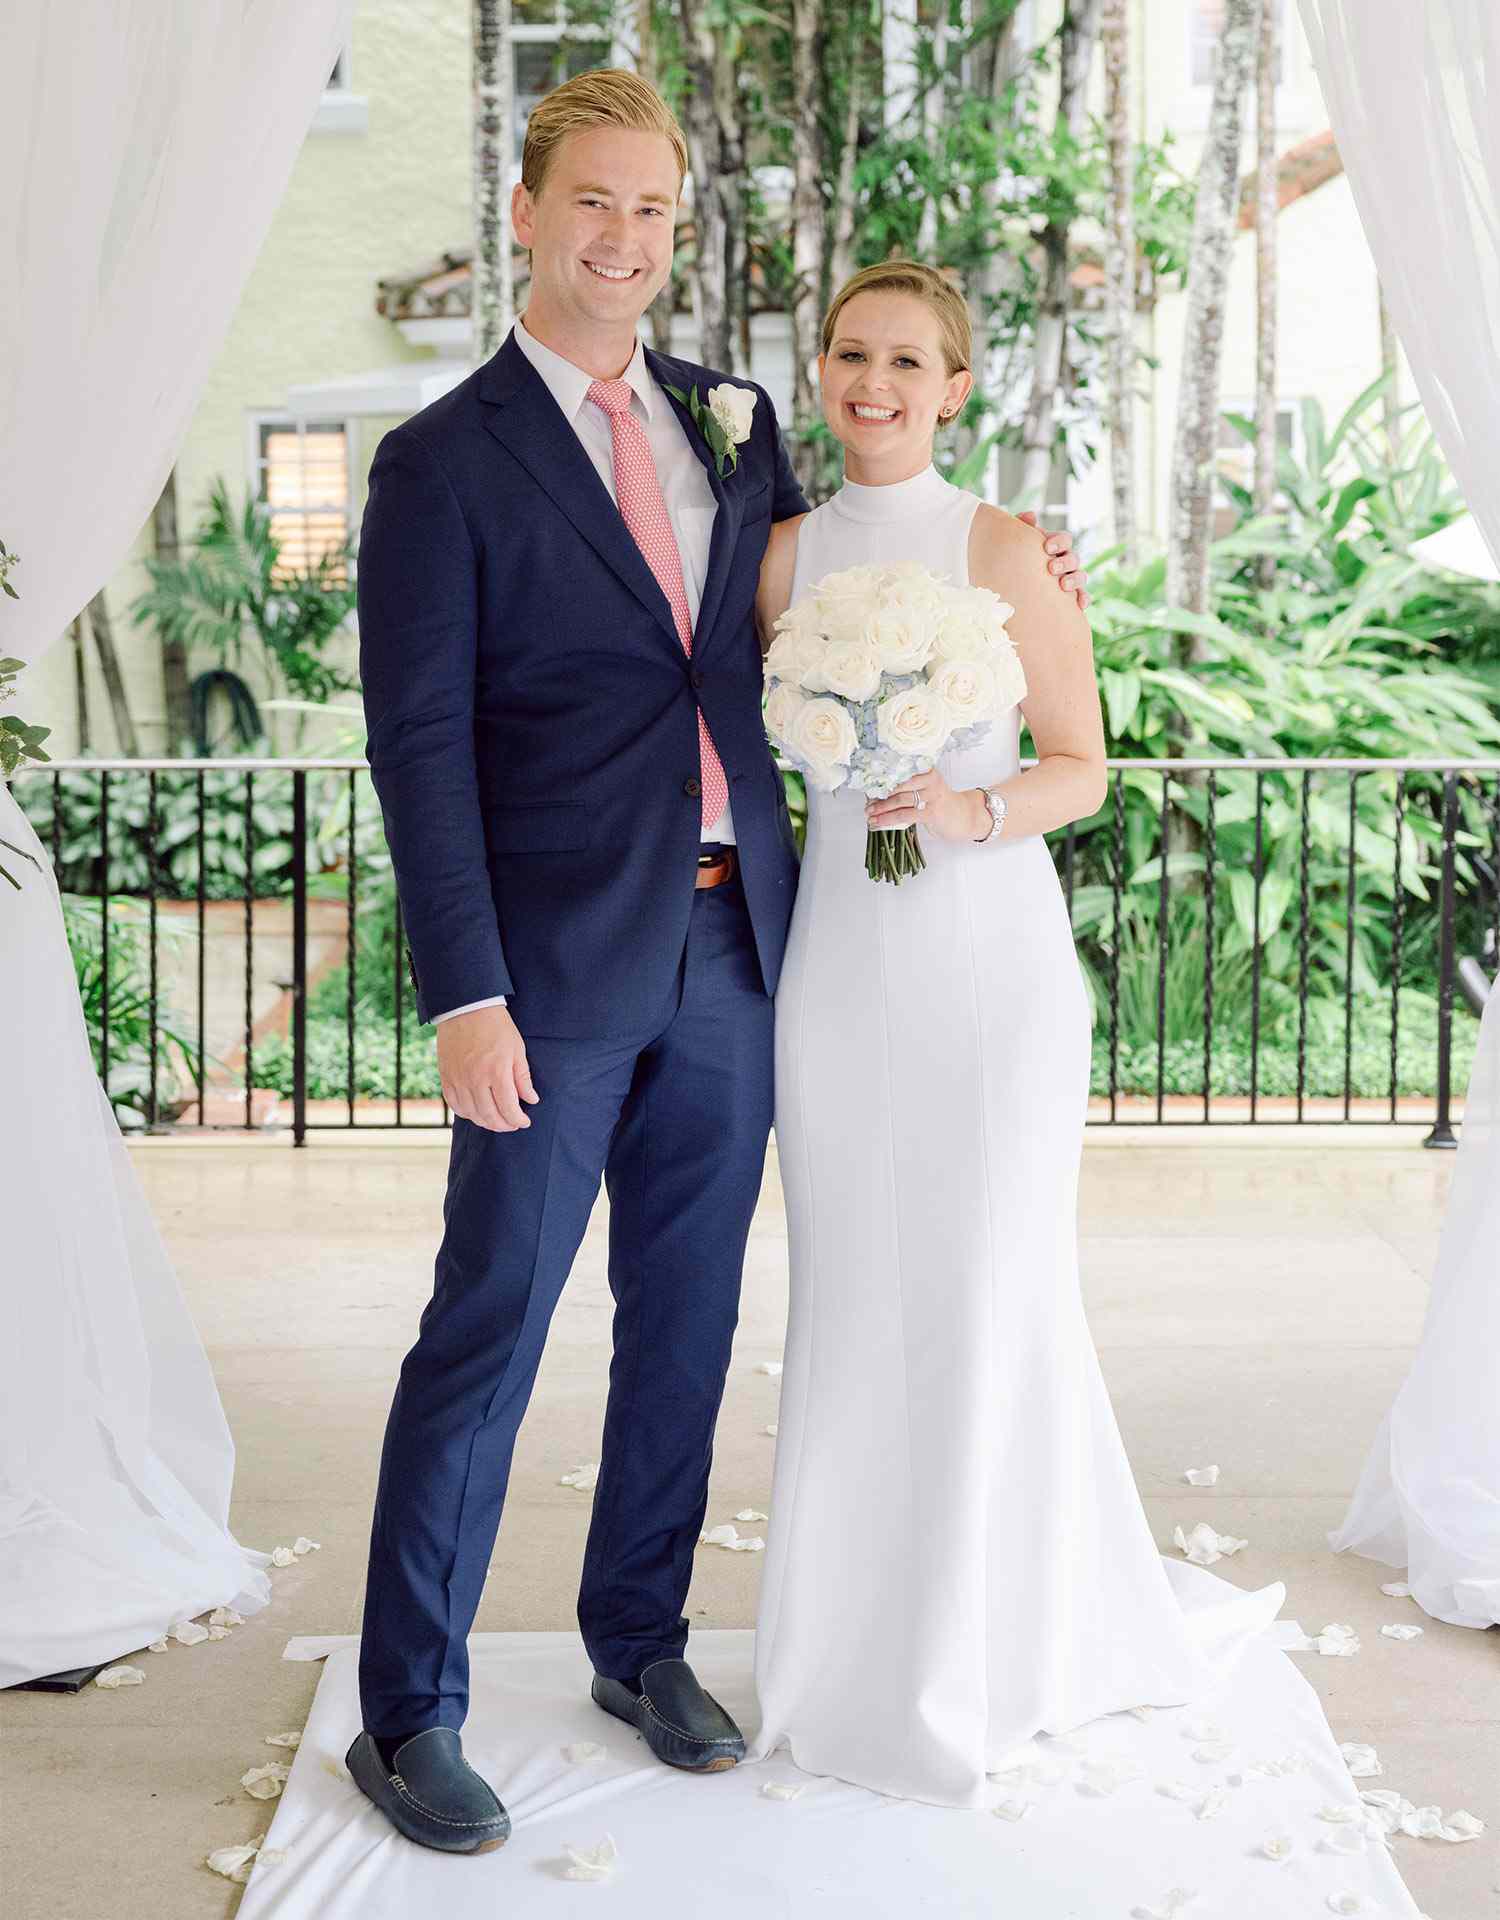 Fox New's Peter Doocy Officiated His Sister's Wedding in a Hurricane |  PEOPLE.com